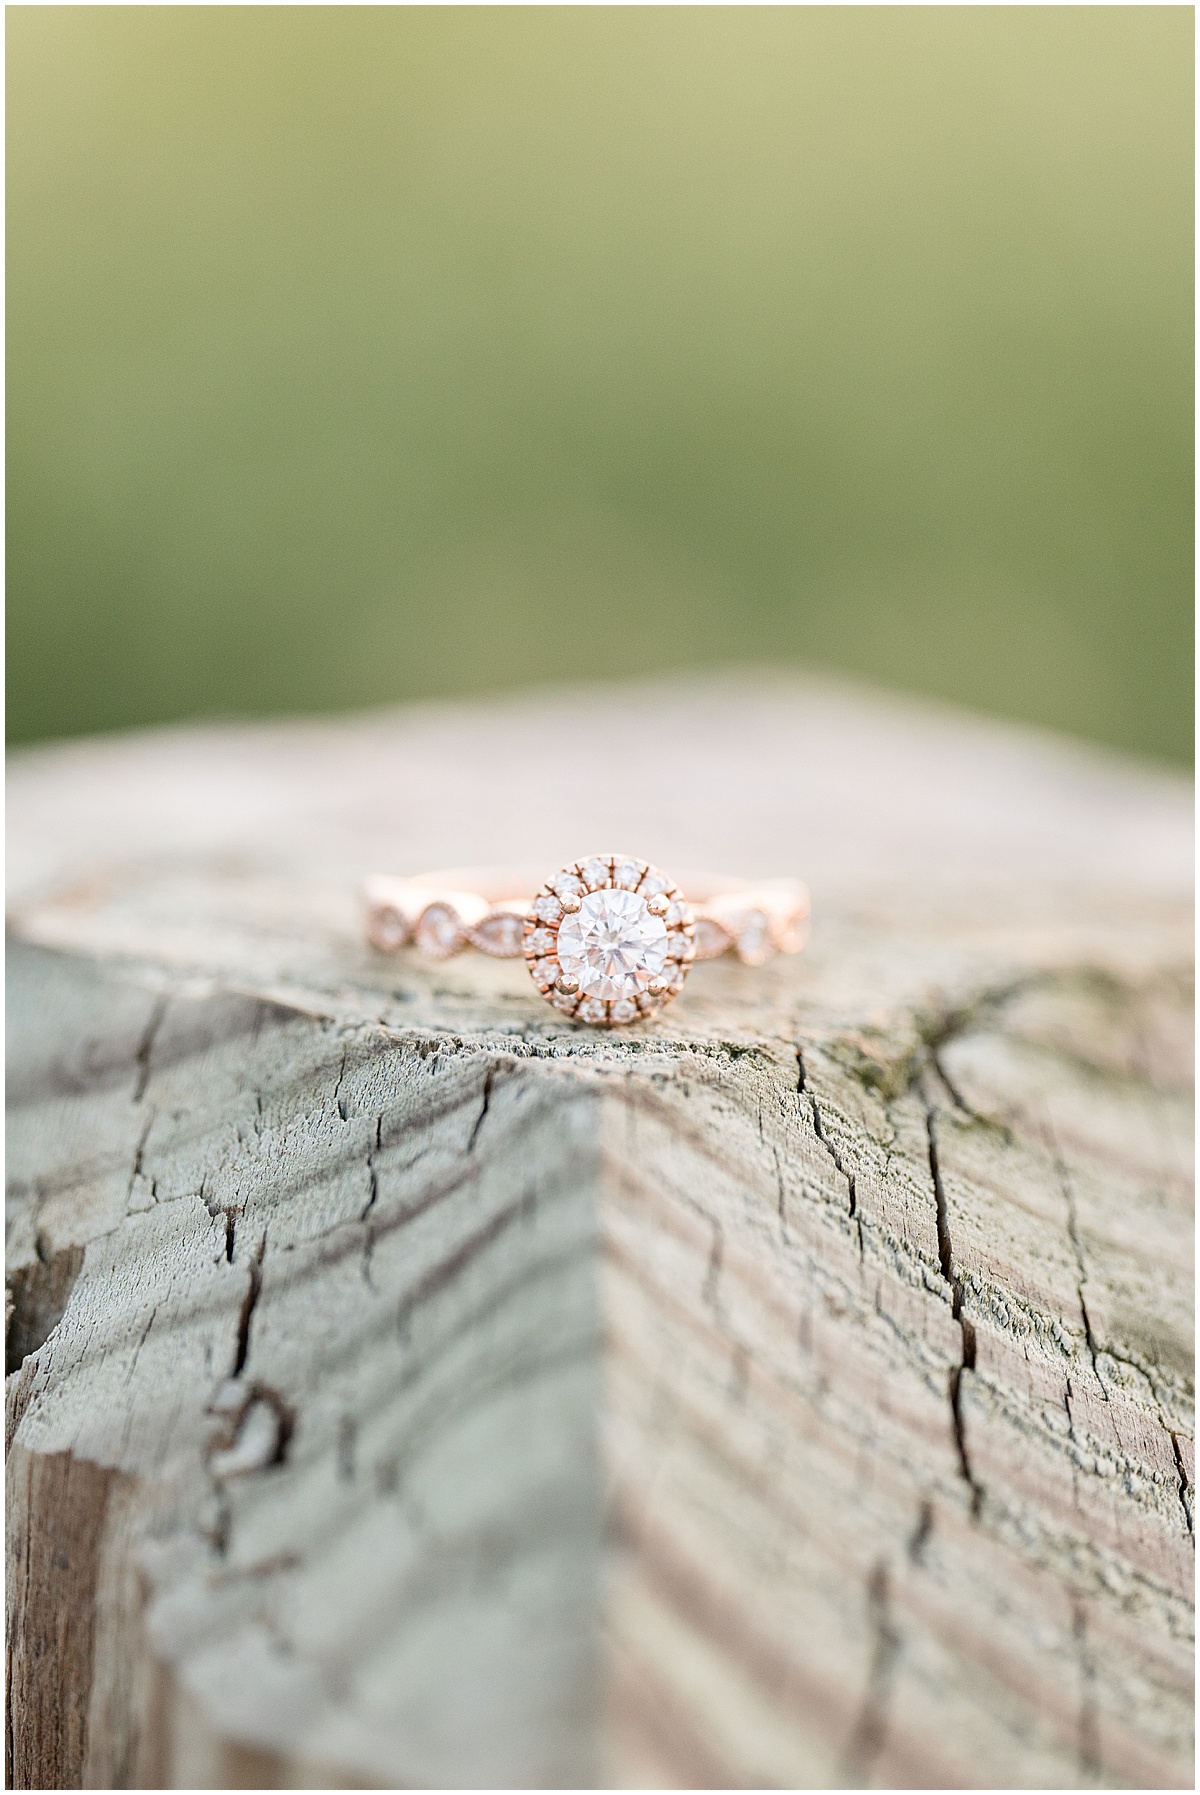 Engagement photos at Strawtown Koteewi Park in Noblesville, Indiana by Indianapolis wedding photographer Victoria Rayburn Photography